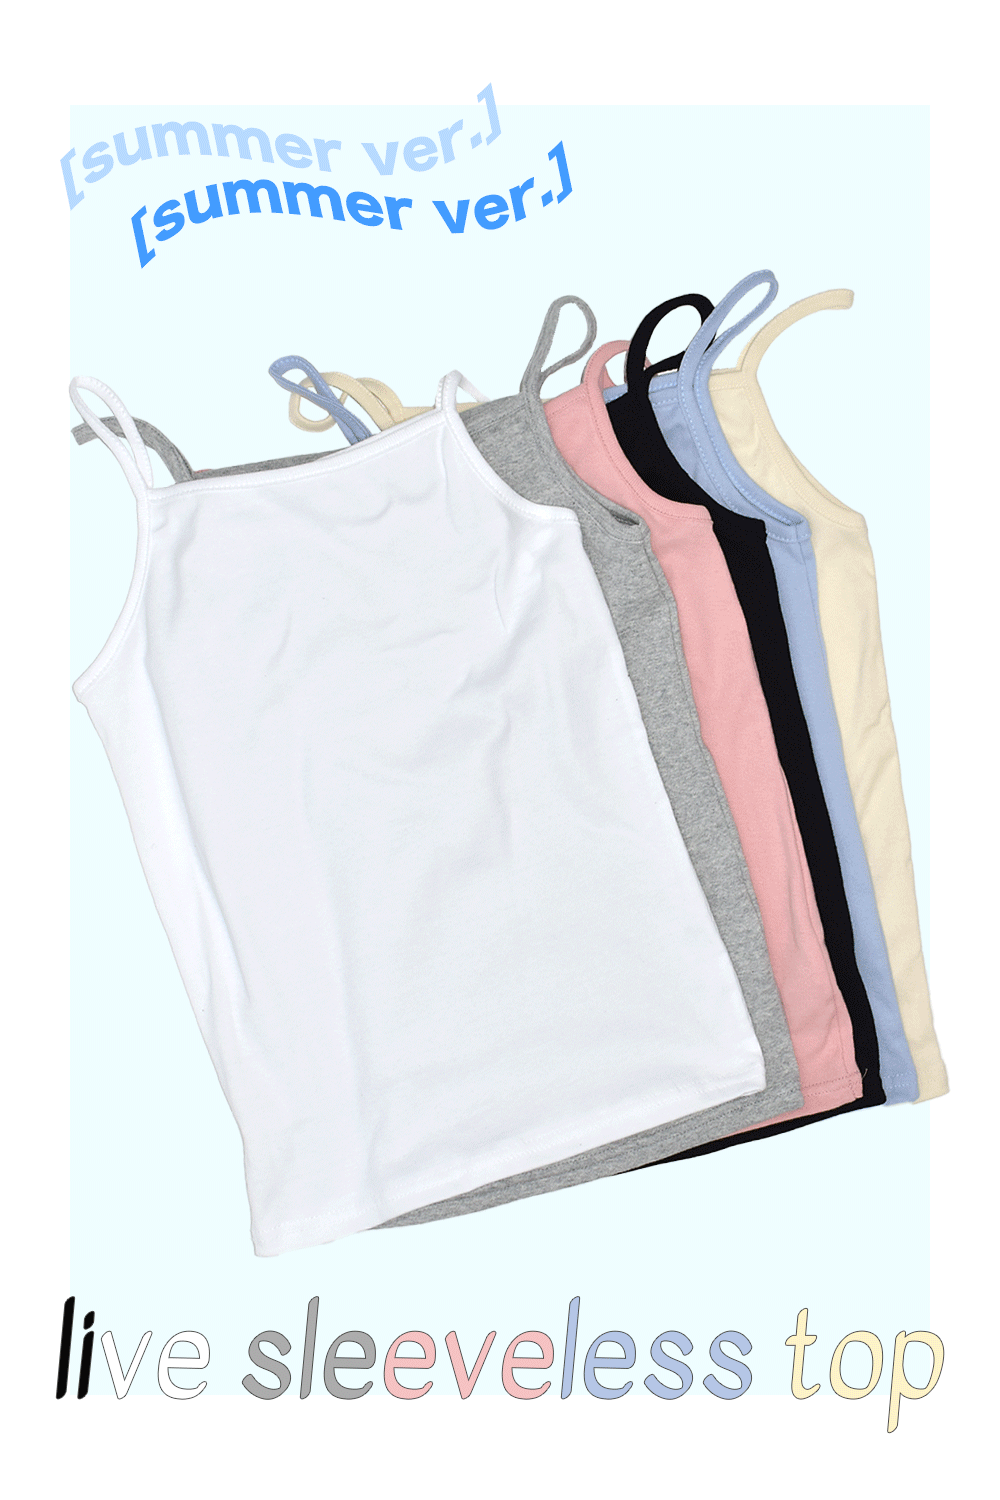 [summer ver.] live sleeveless top (6colors)